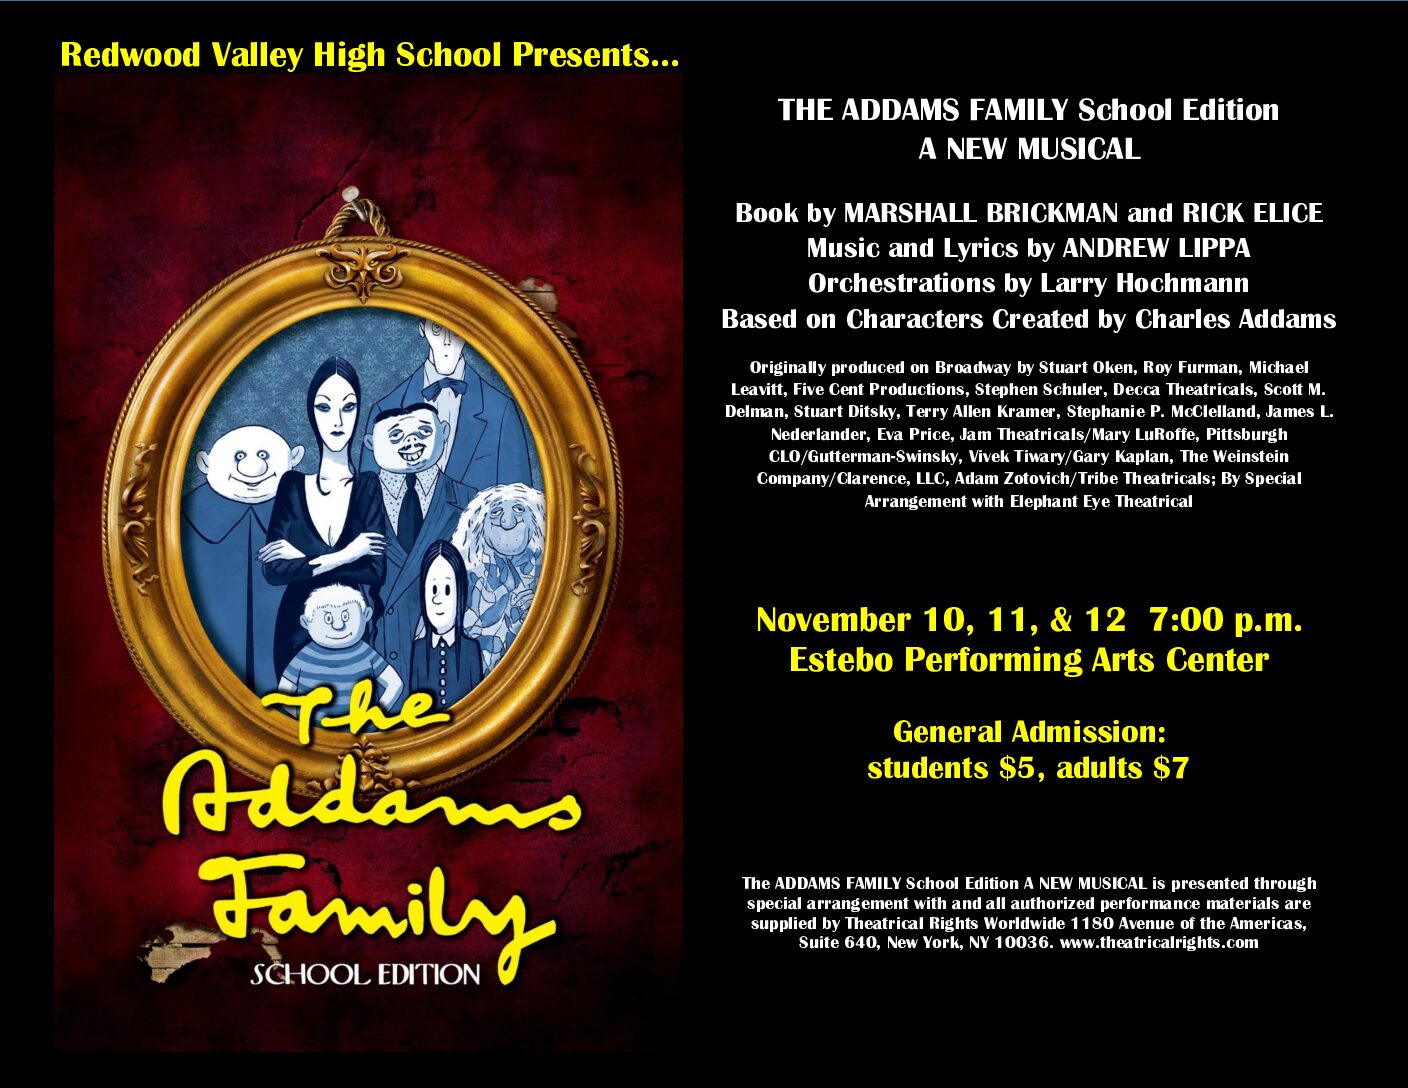 <h1 class="tribe-events-single-event-title">Redwood Valley High School Musical: The Addams Family</h1>